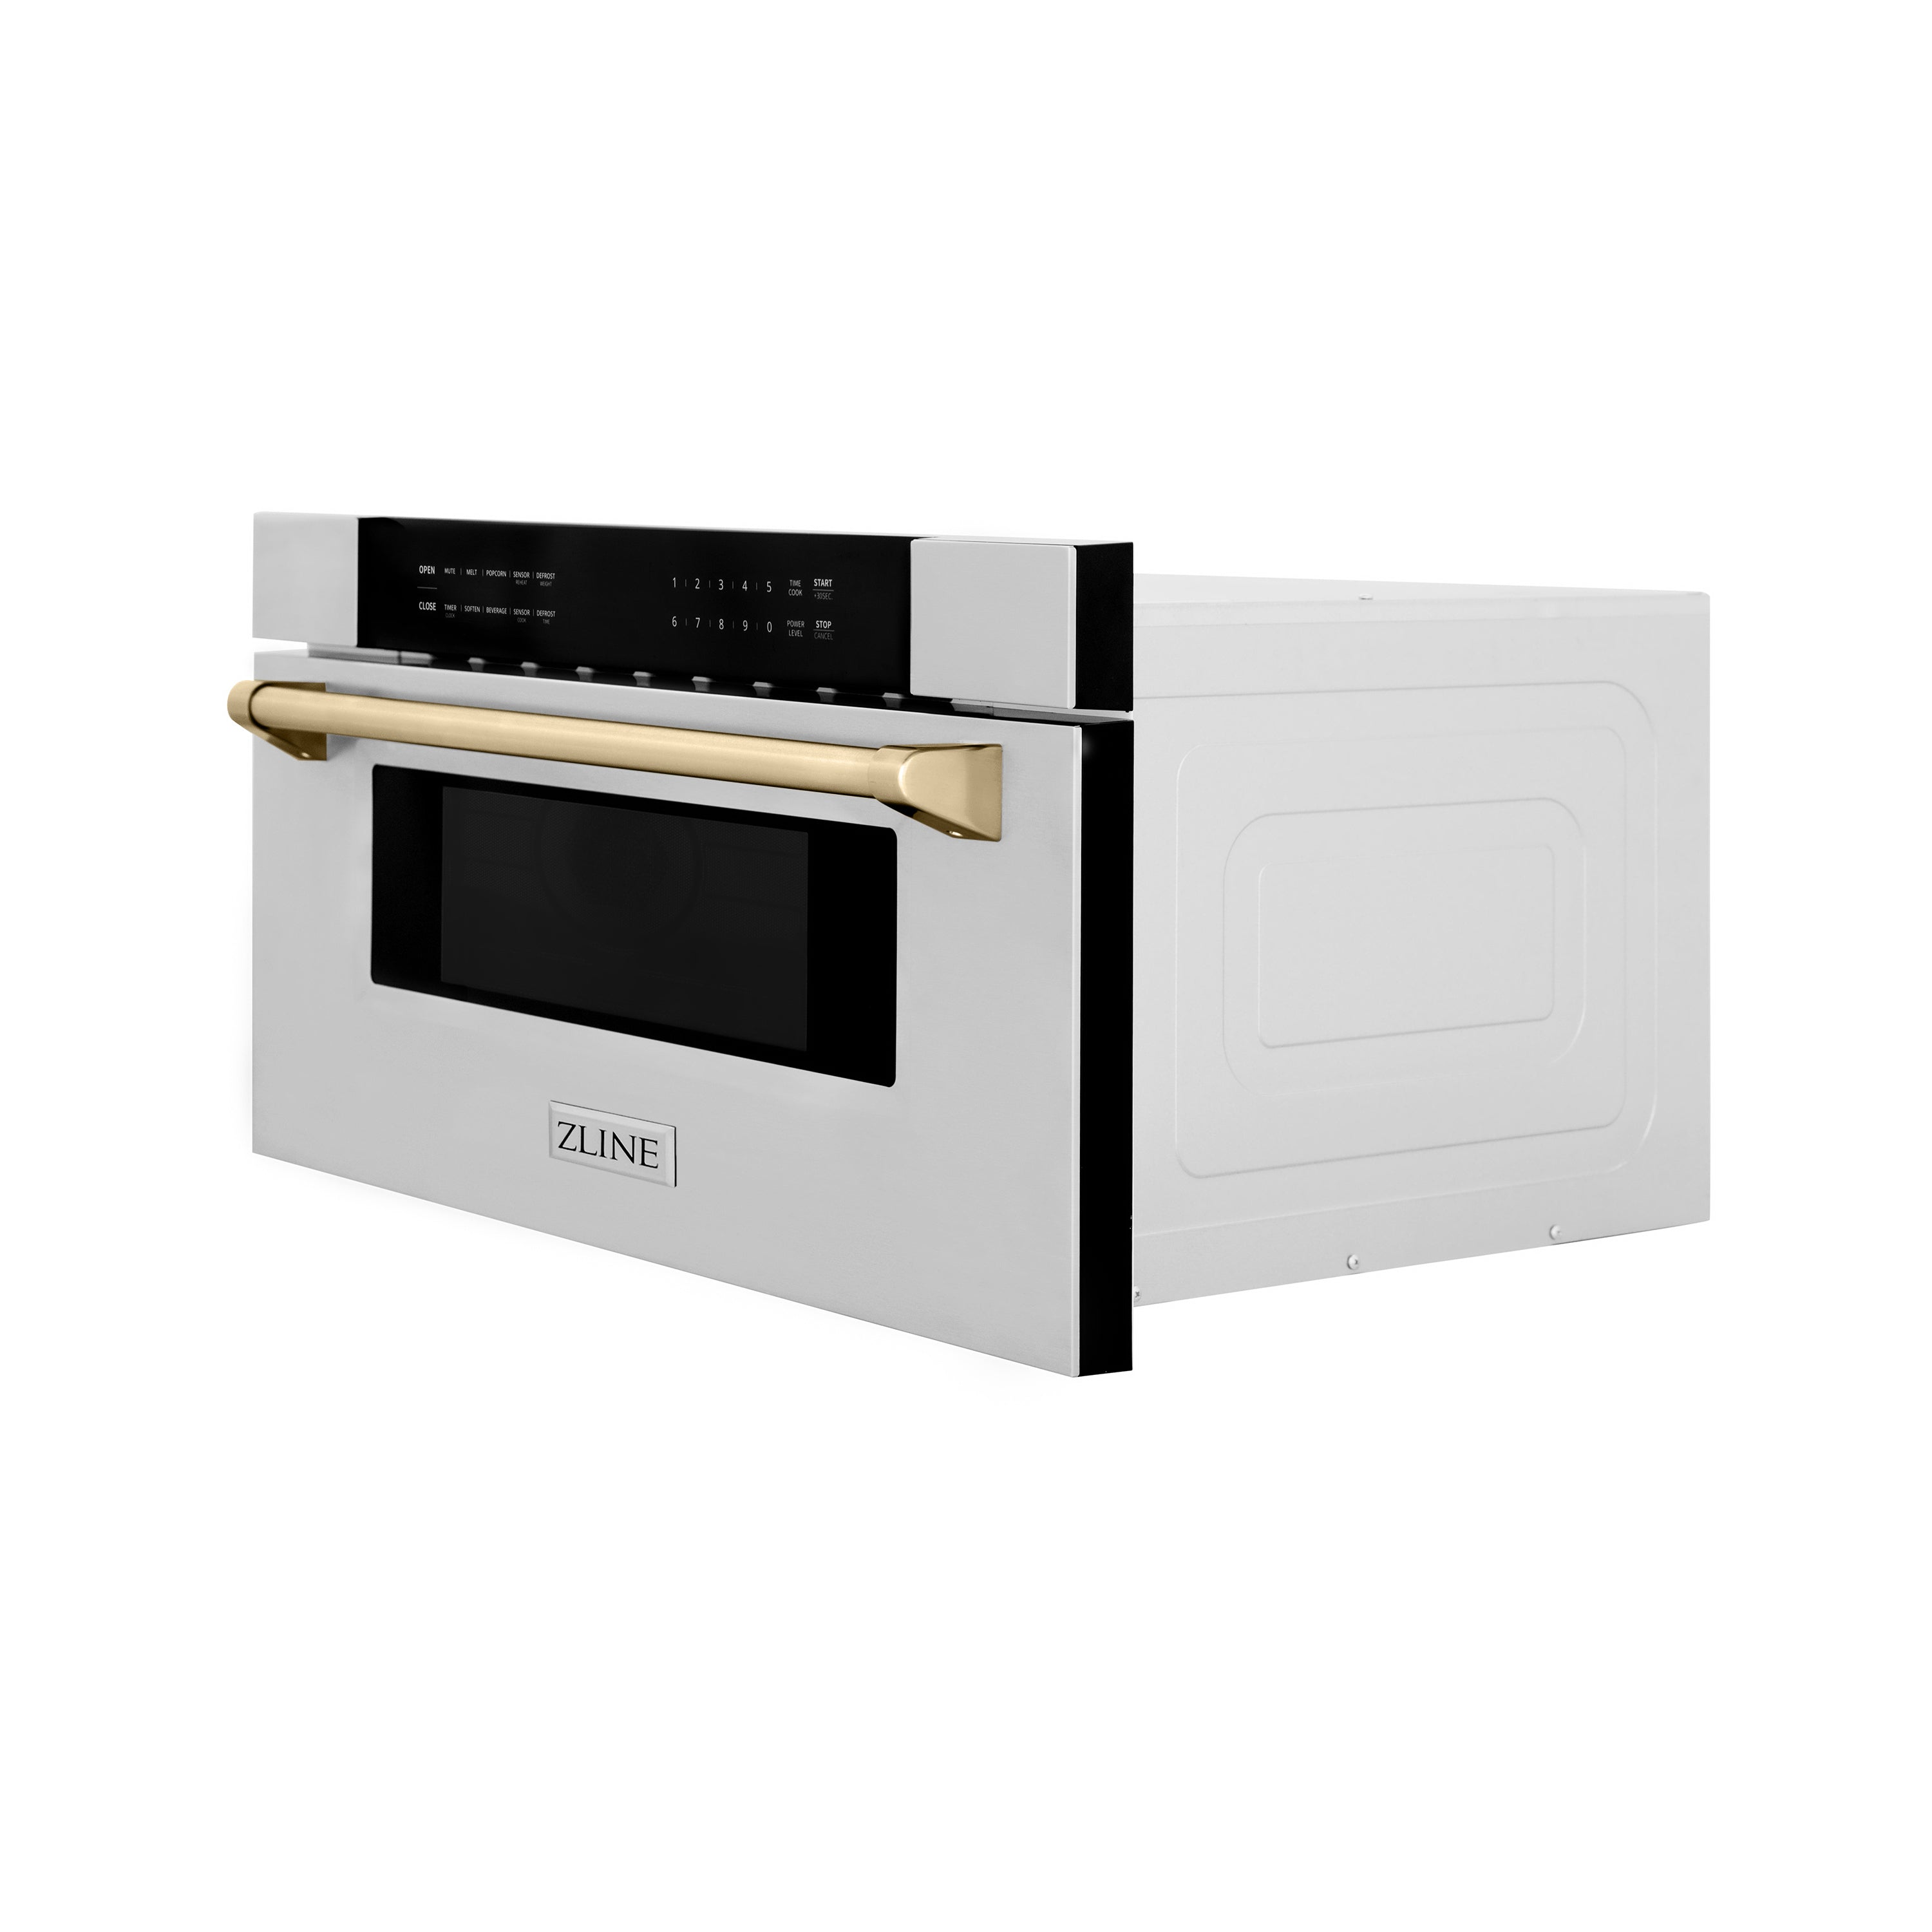 ZLINE Autograph Edition 30" 1.2 cu. ft. Built-In Microwave Drawer in Stainless Steel with Accents (MWDZ-30) - New Star Living